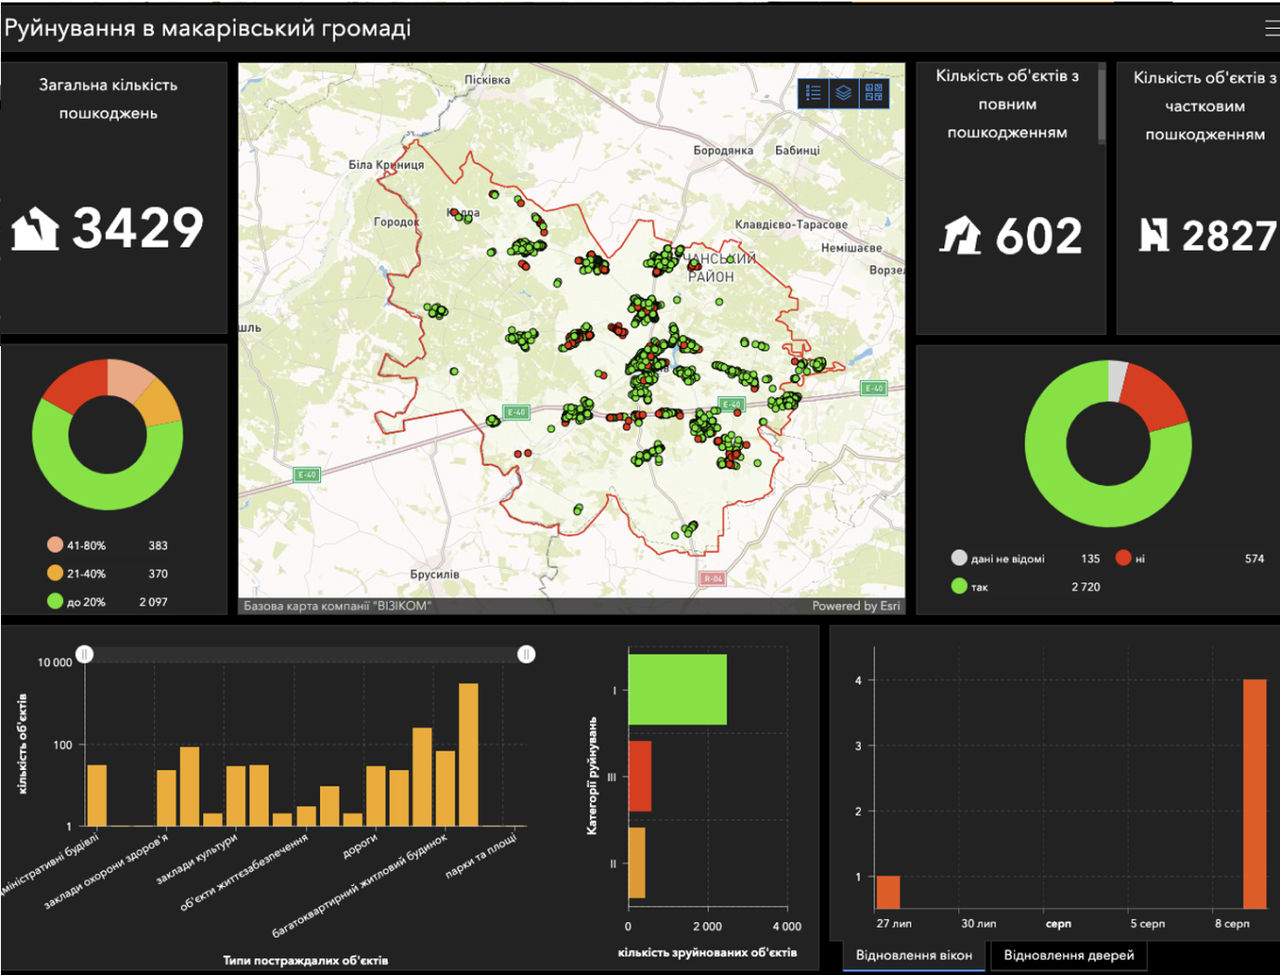 Dashboard of the destruction in the Makariv community. The map displays damaged buildings (educational, healthcare, cultural, sports, and other institutions - 3429 facilities total).